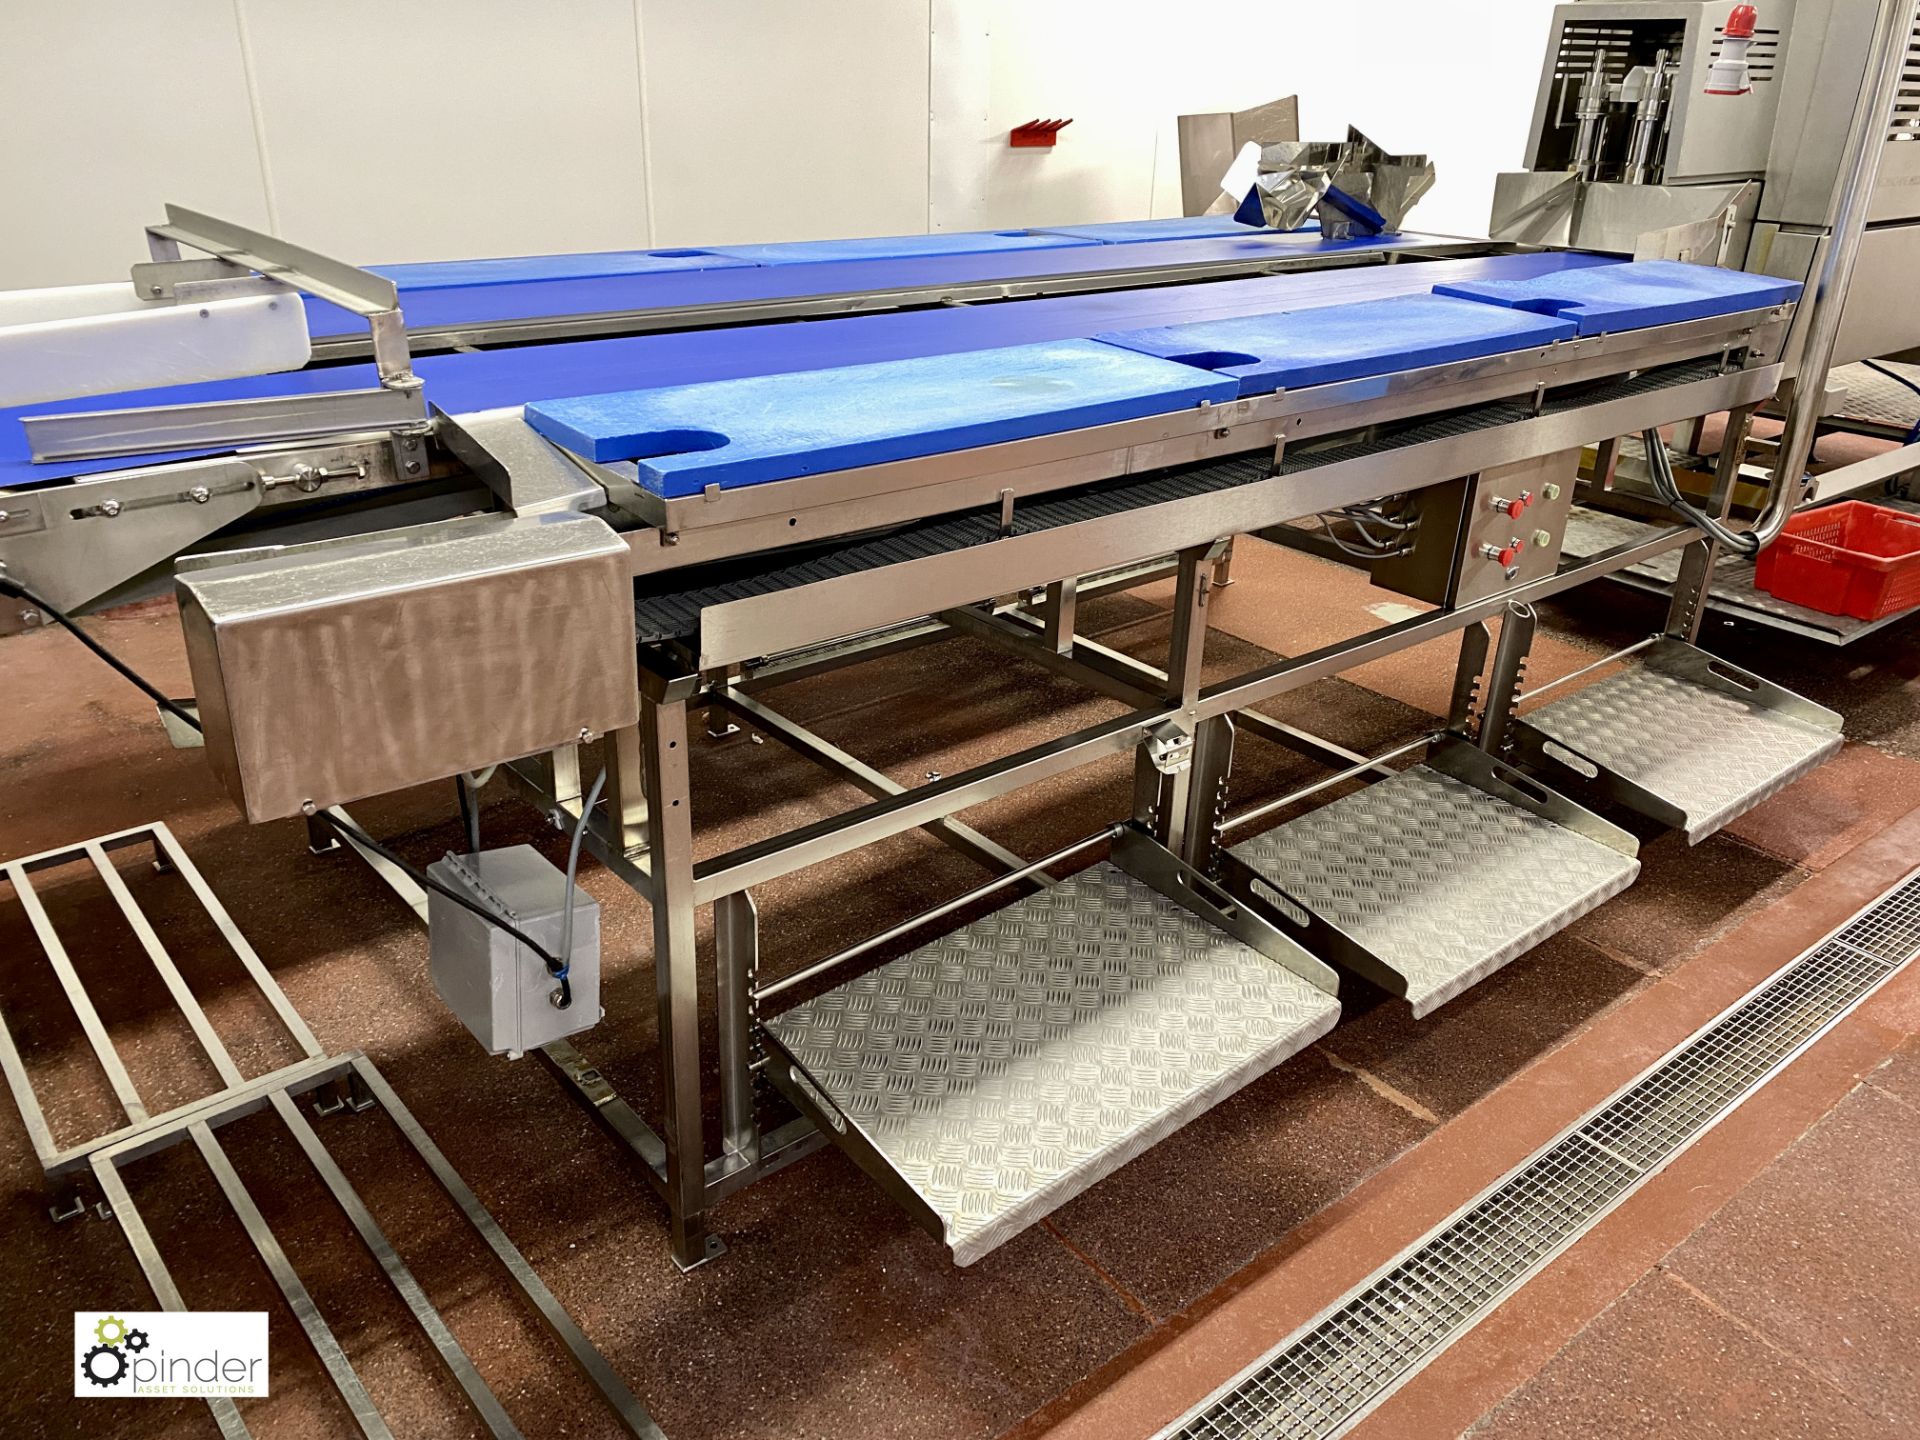 Twin lane manual Filleting Table, with 2 central conveyors 330mm wide x 4100mm long, 6 manual